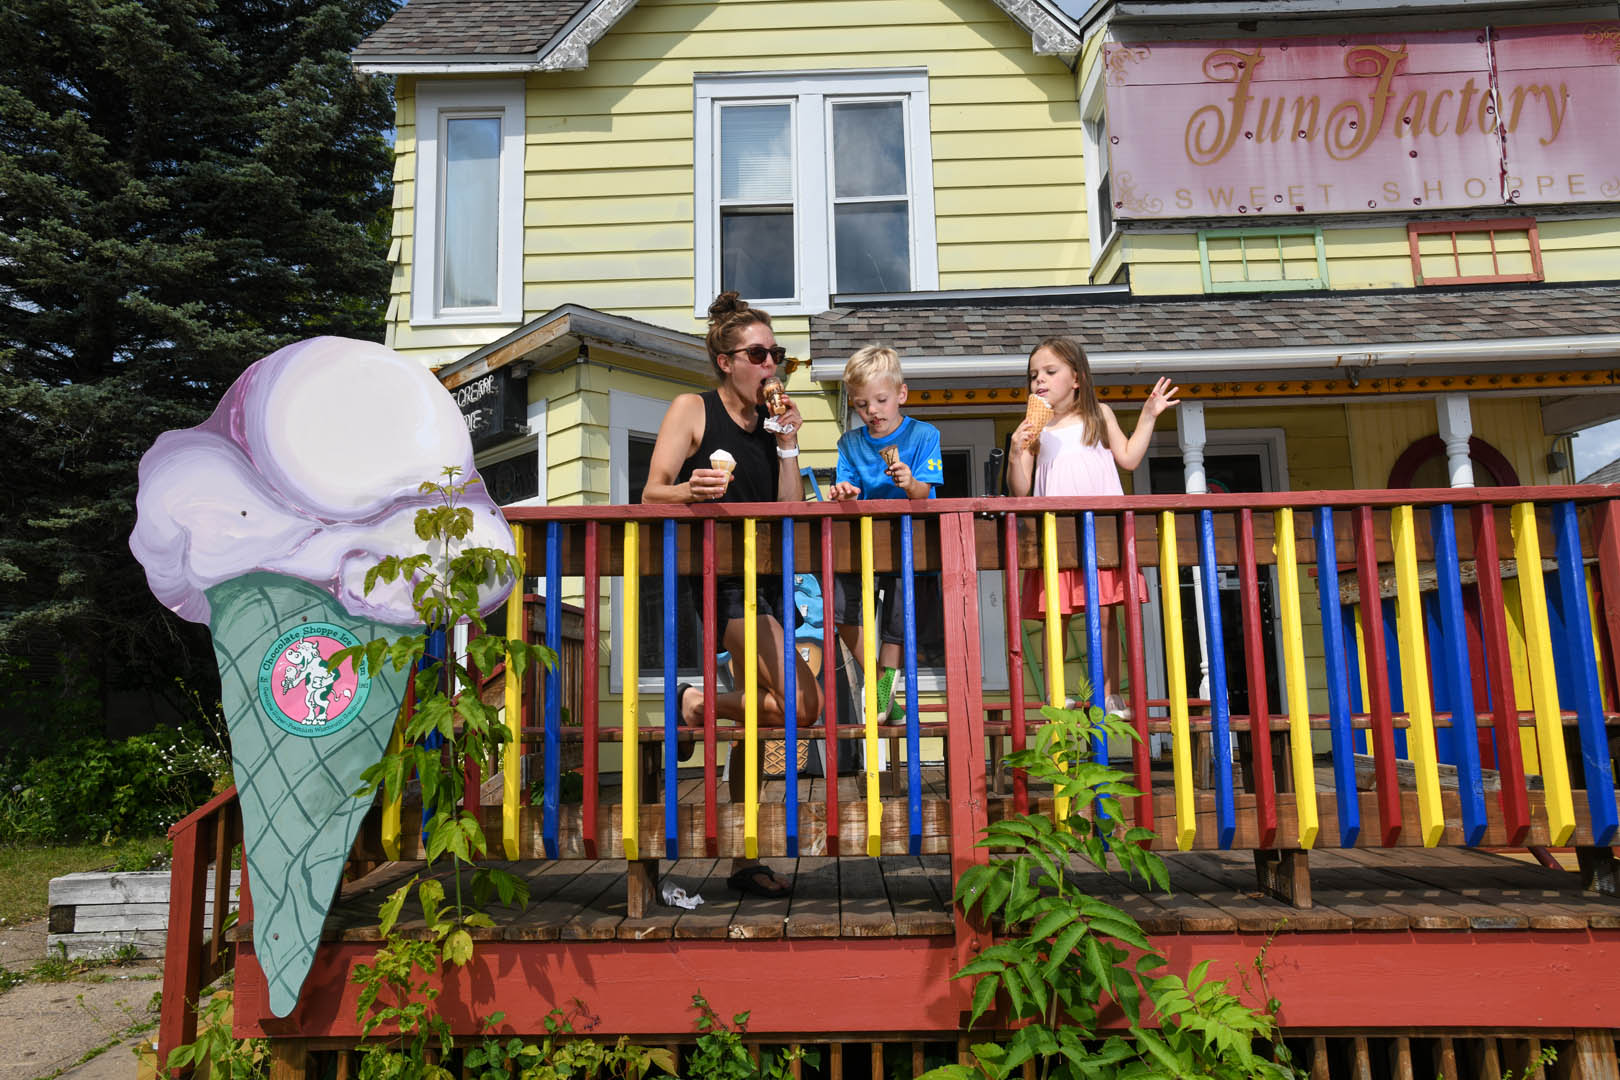 Fun Factory Sweet Shoppe | A family eating sweet ice cream treats in front of the Fun Factory Sweet Shoppe